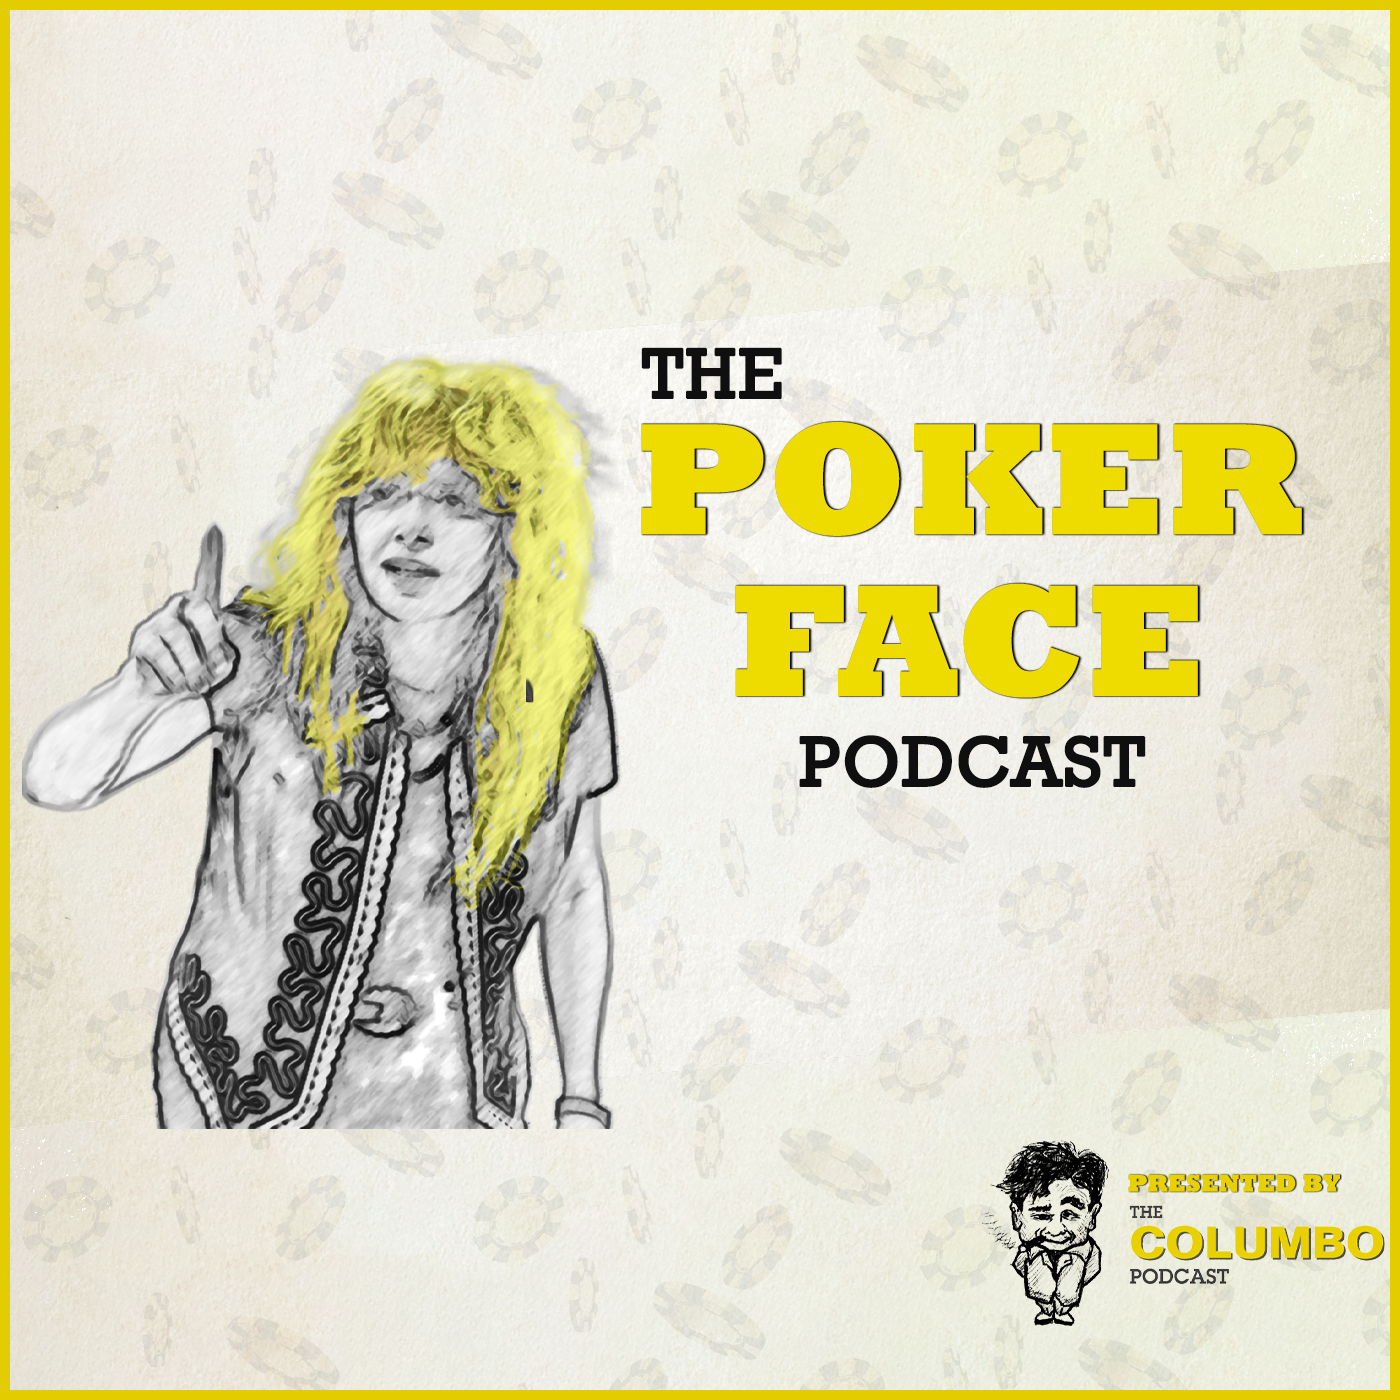 The Night Shift – Poker Face Podcast Episode 2